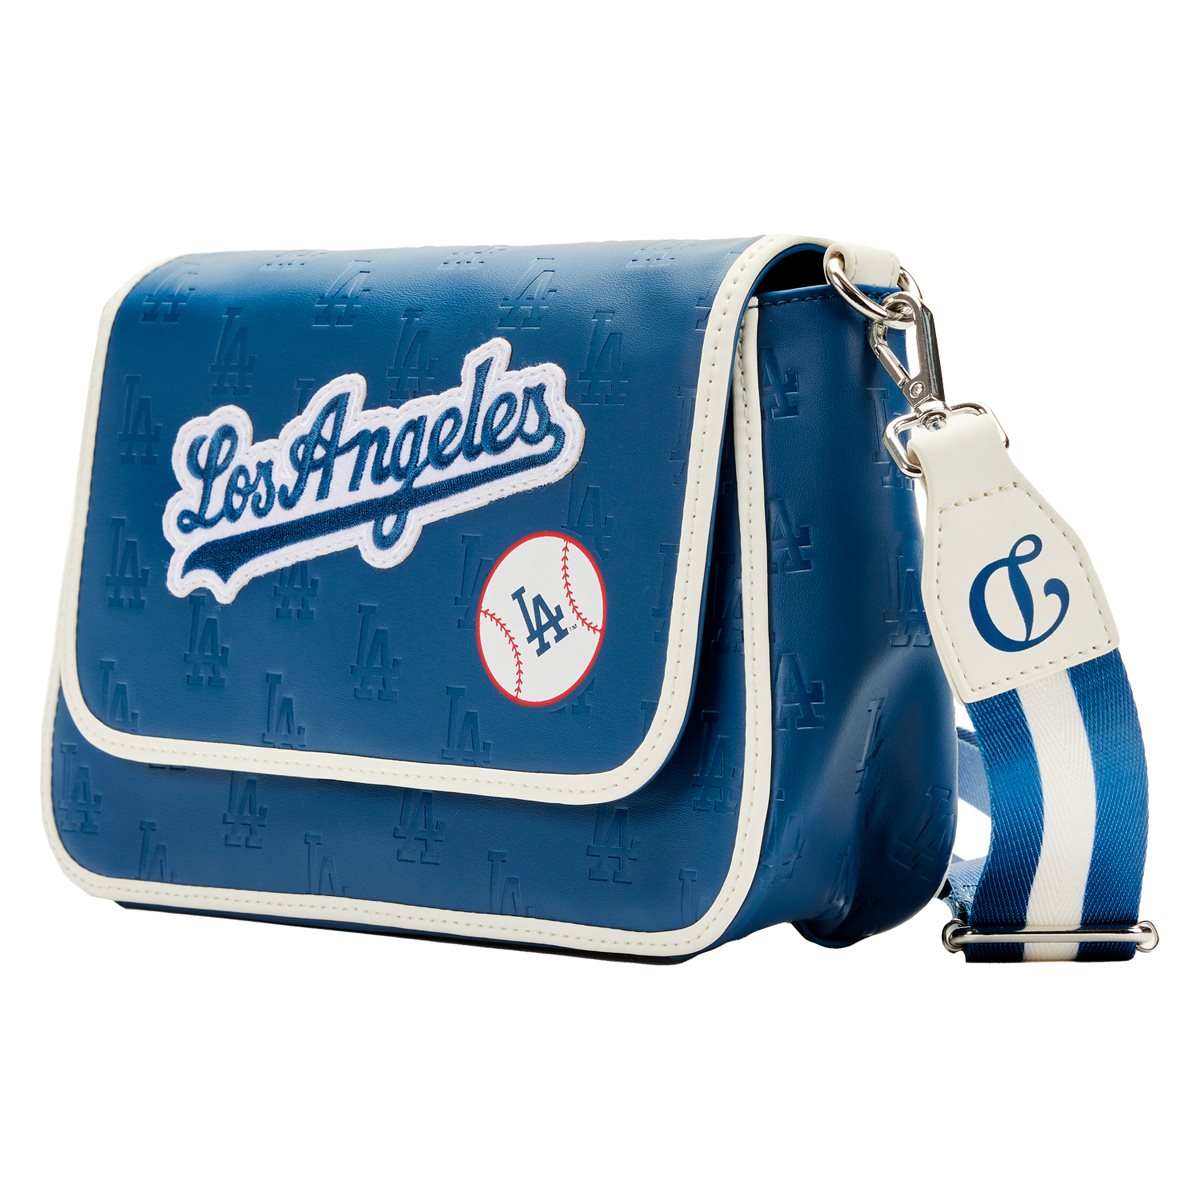 Loungefly Los Angeles Angels Stadium Crossbody Bag with Pouch